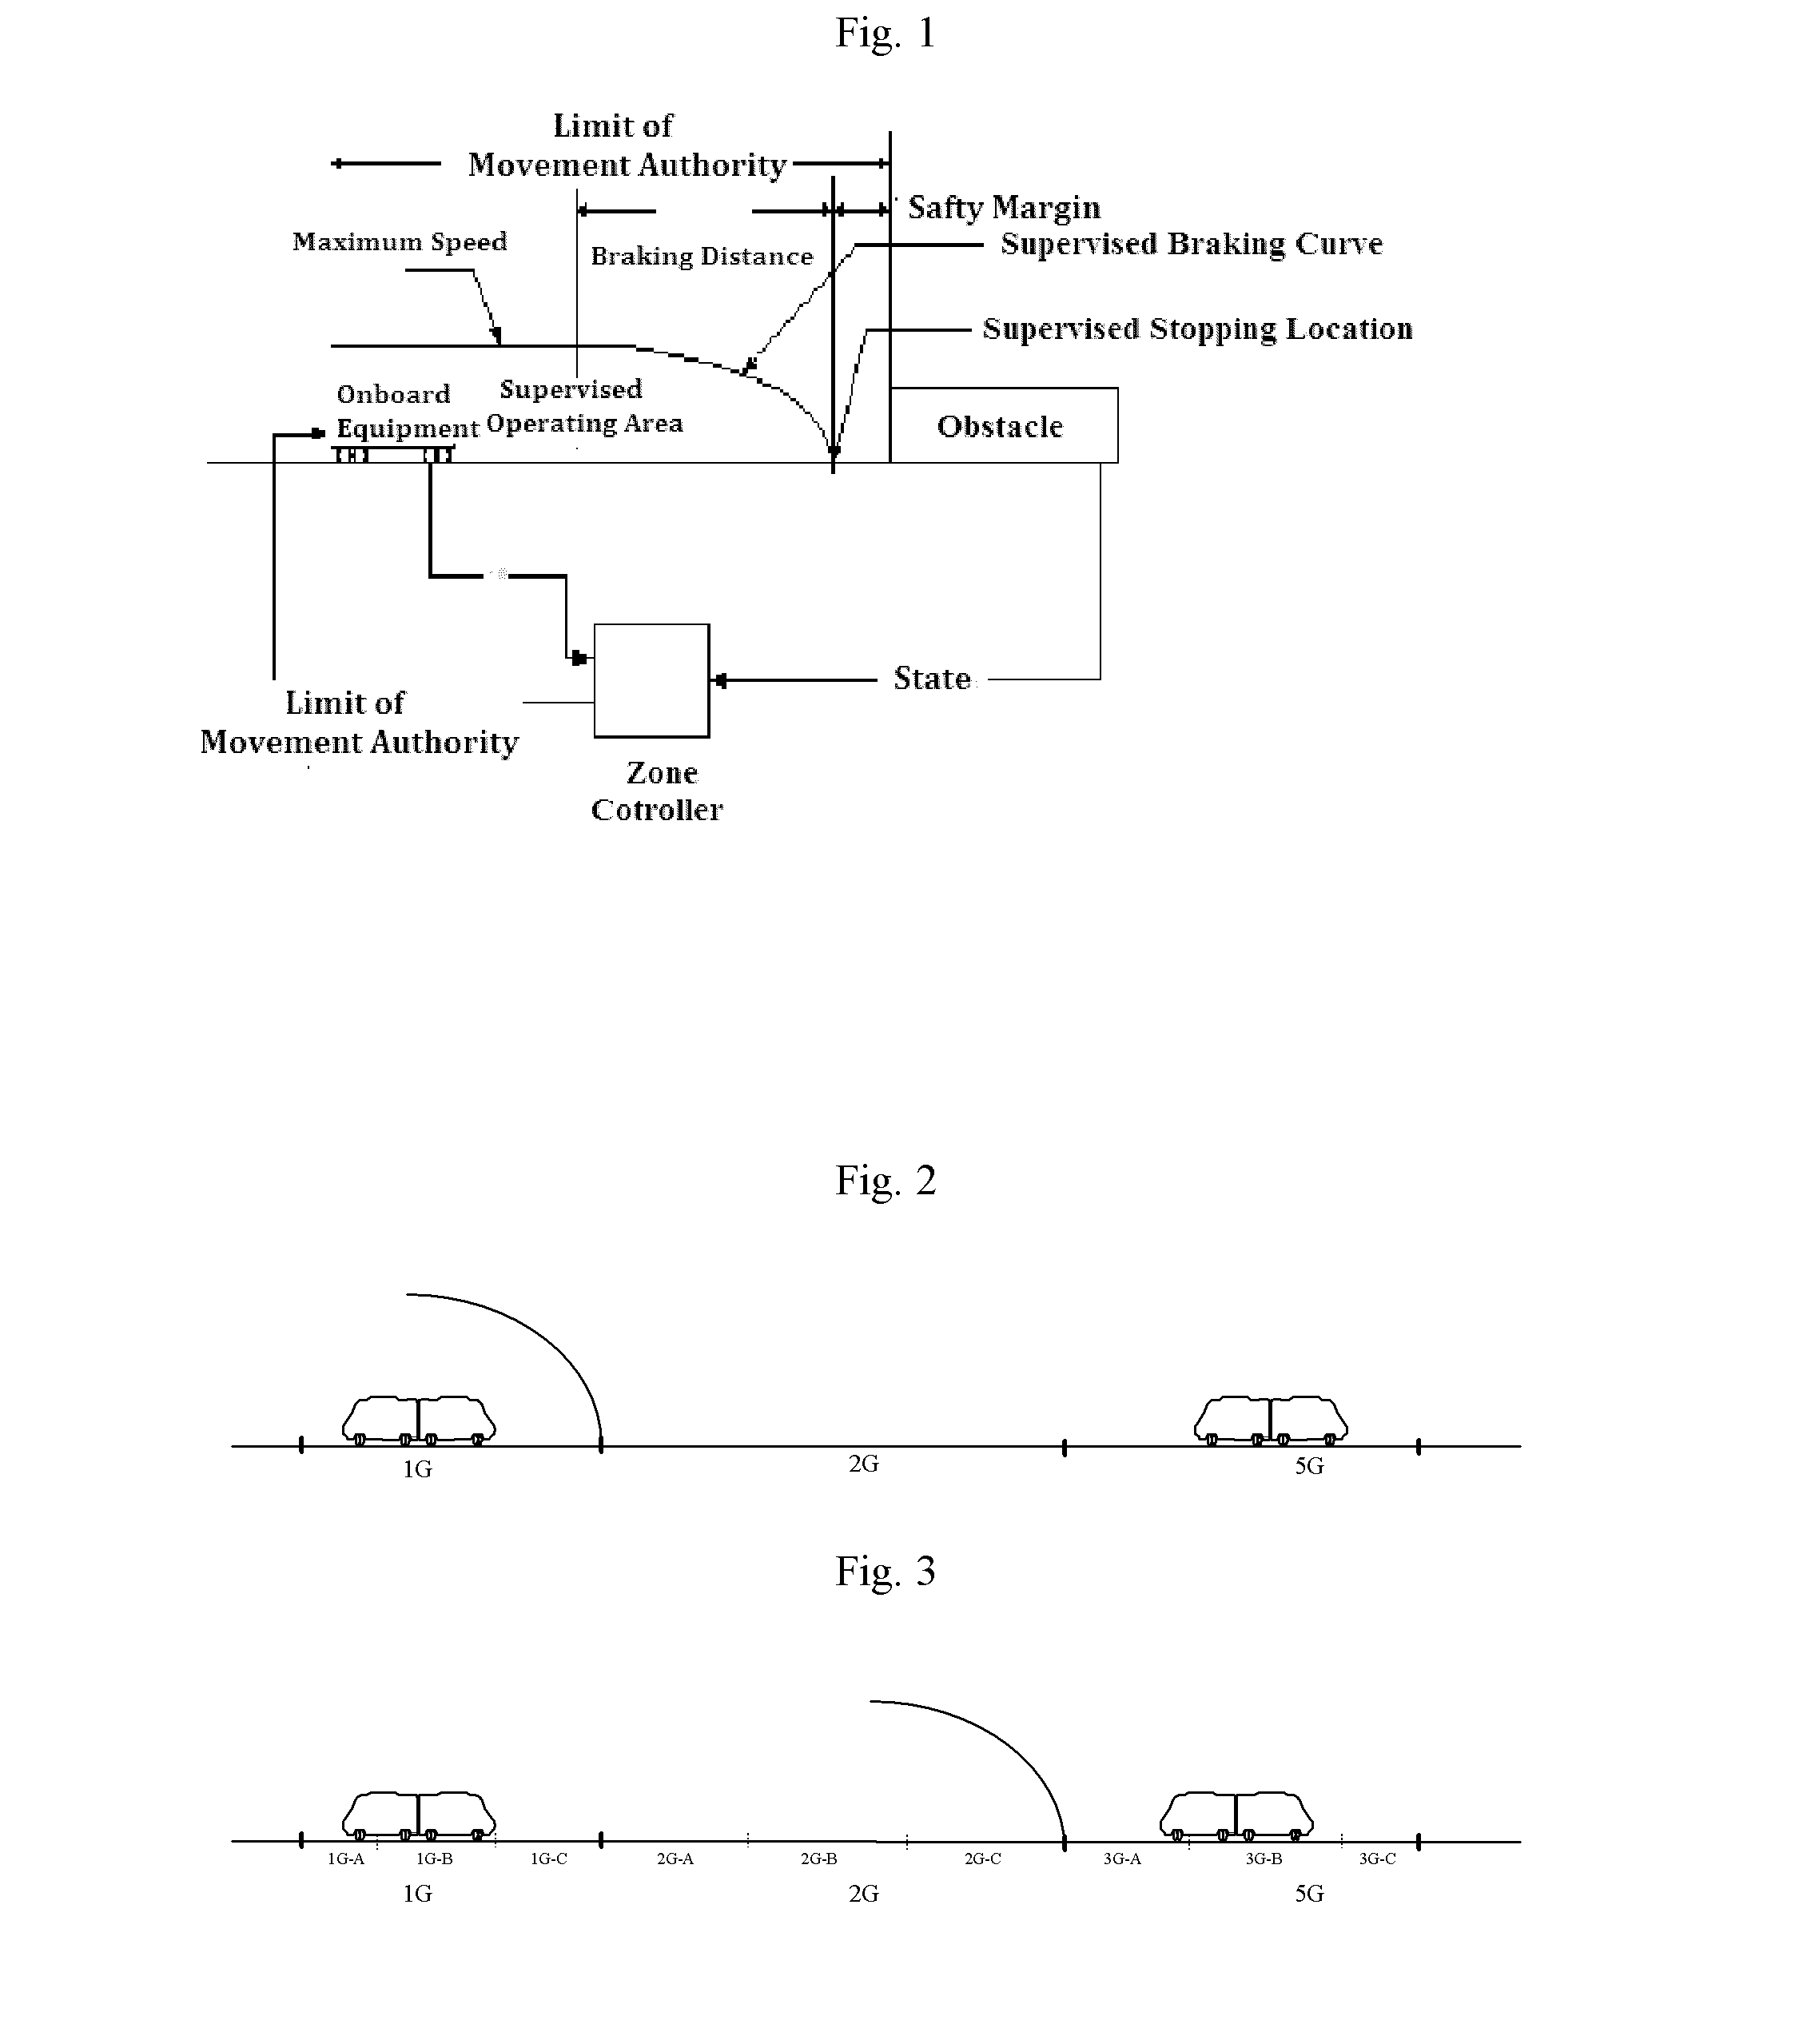 Method of movement authority calculation for communications-based train control system